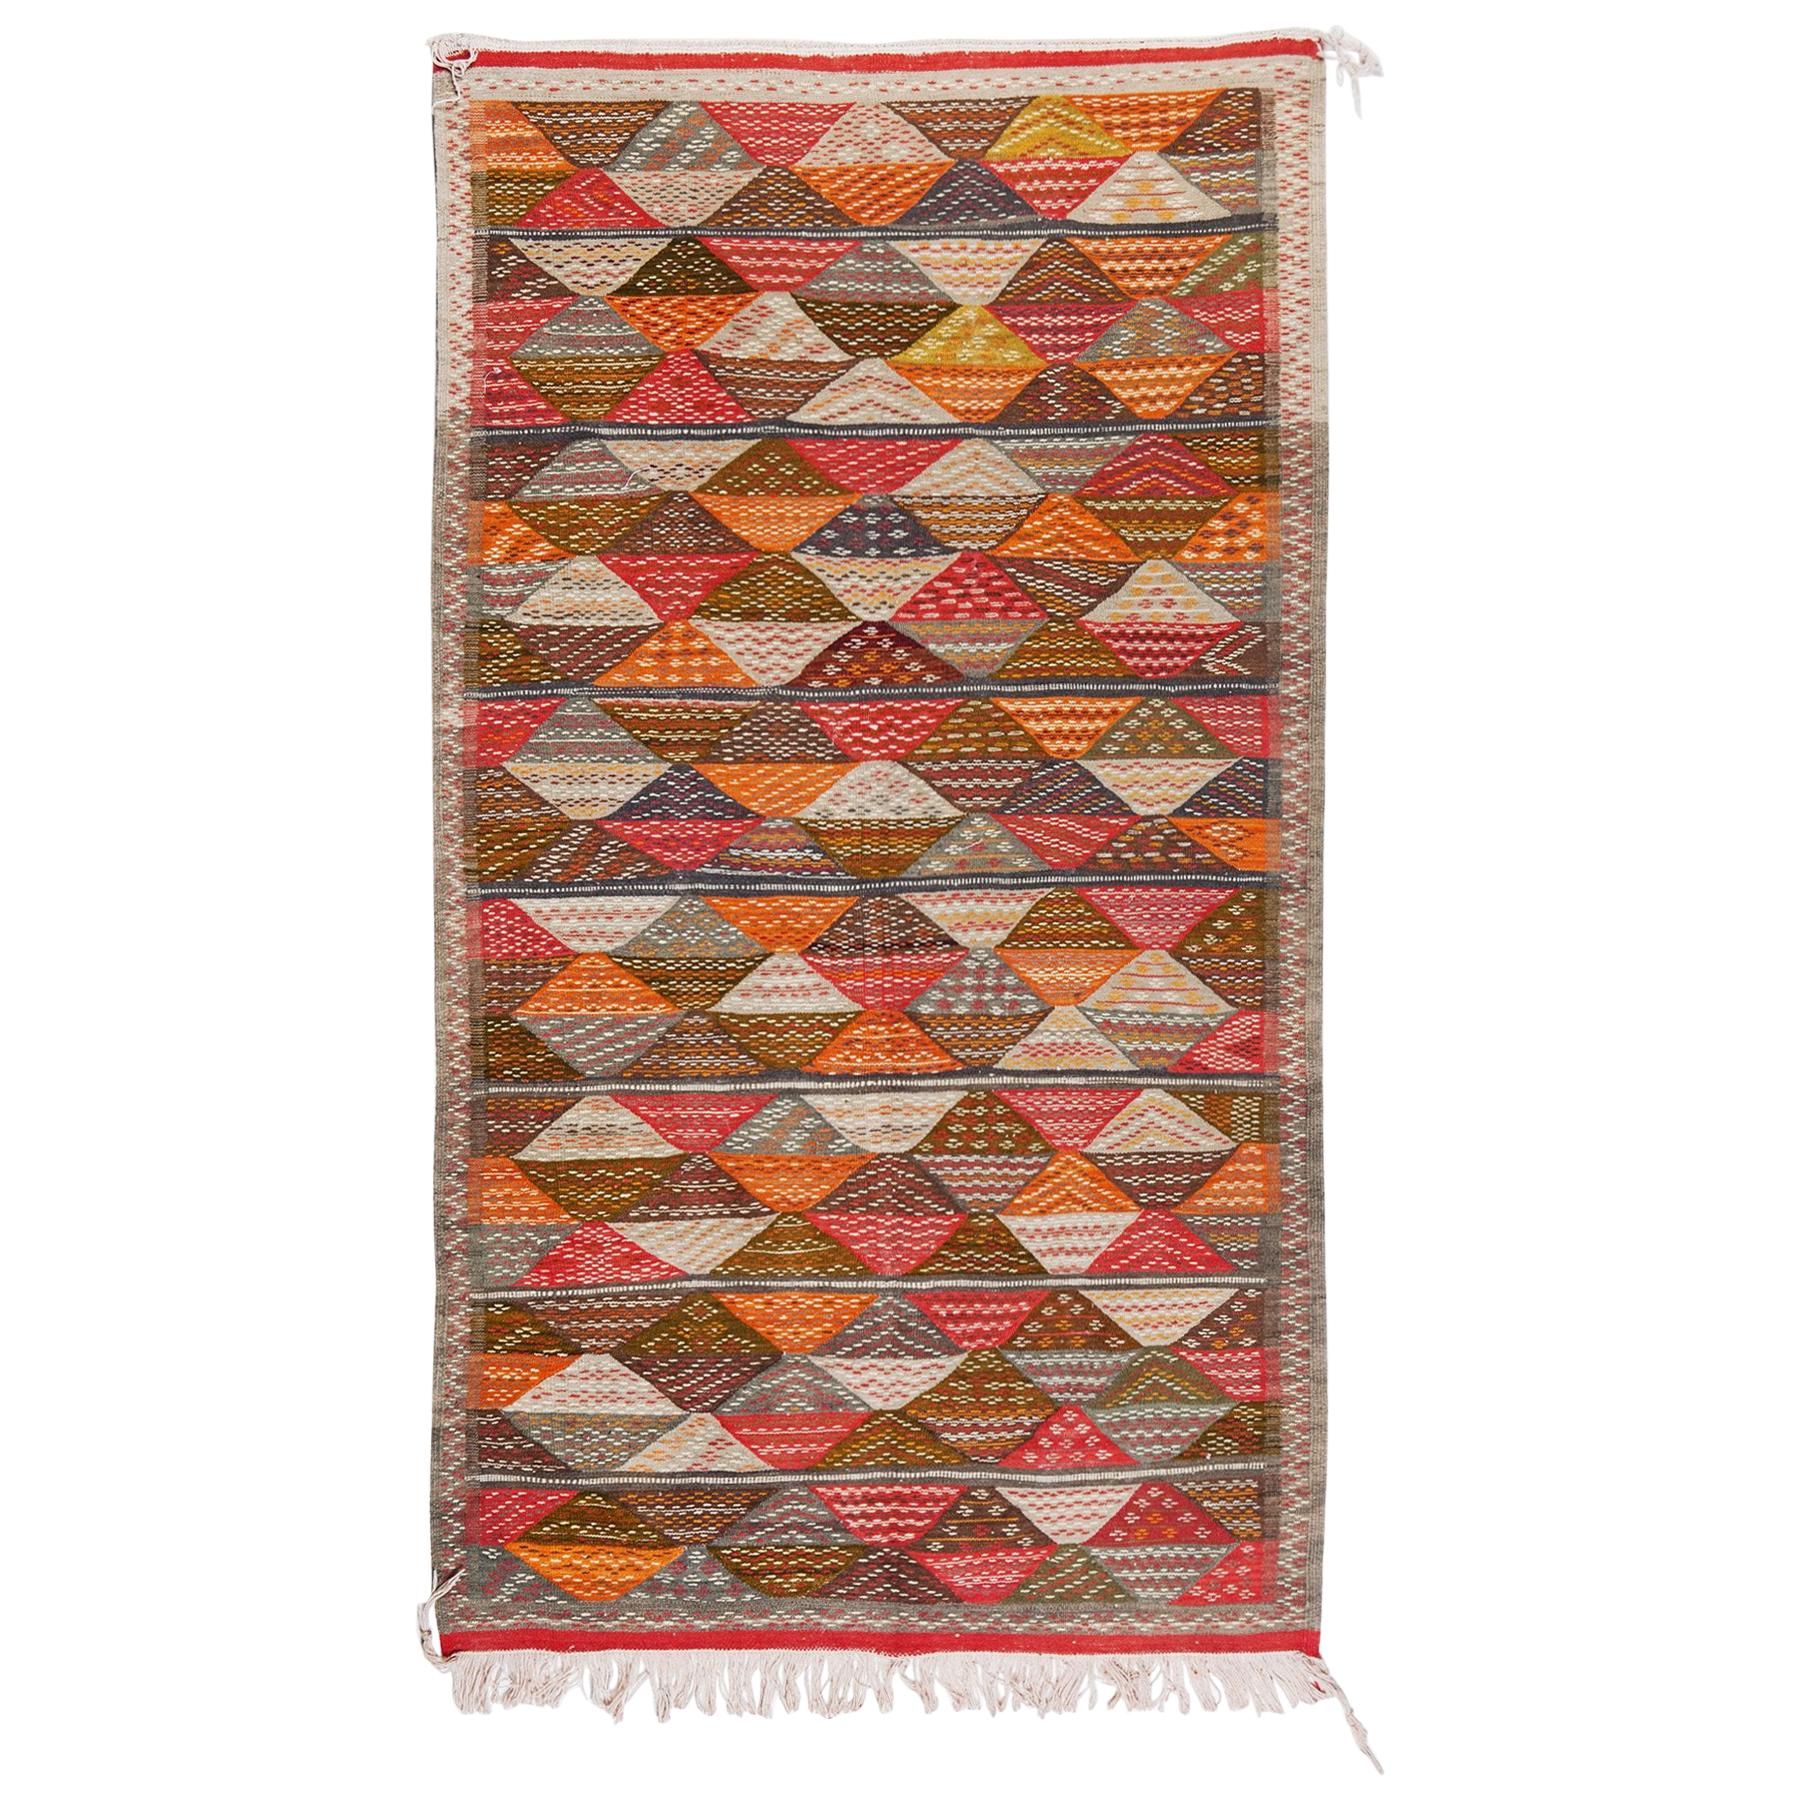 Vintage Tribal Handwoven Wool and Organic Dye Rug or Carpet in Triangle Patterns